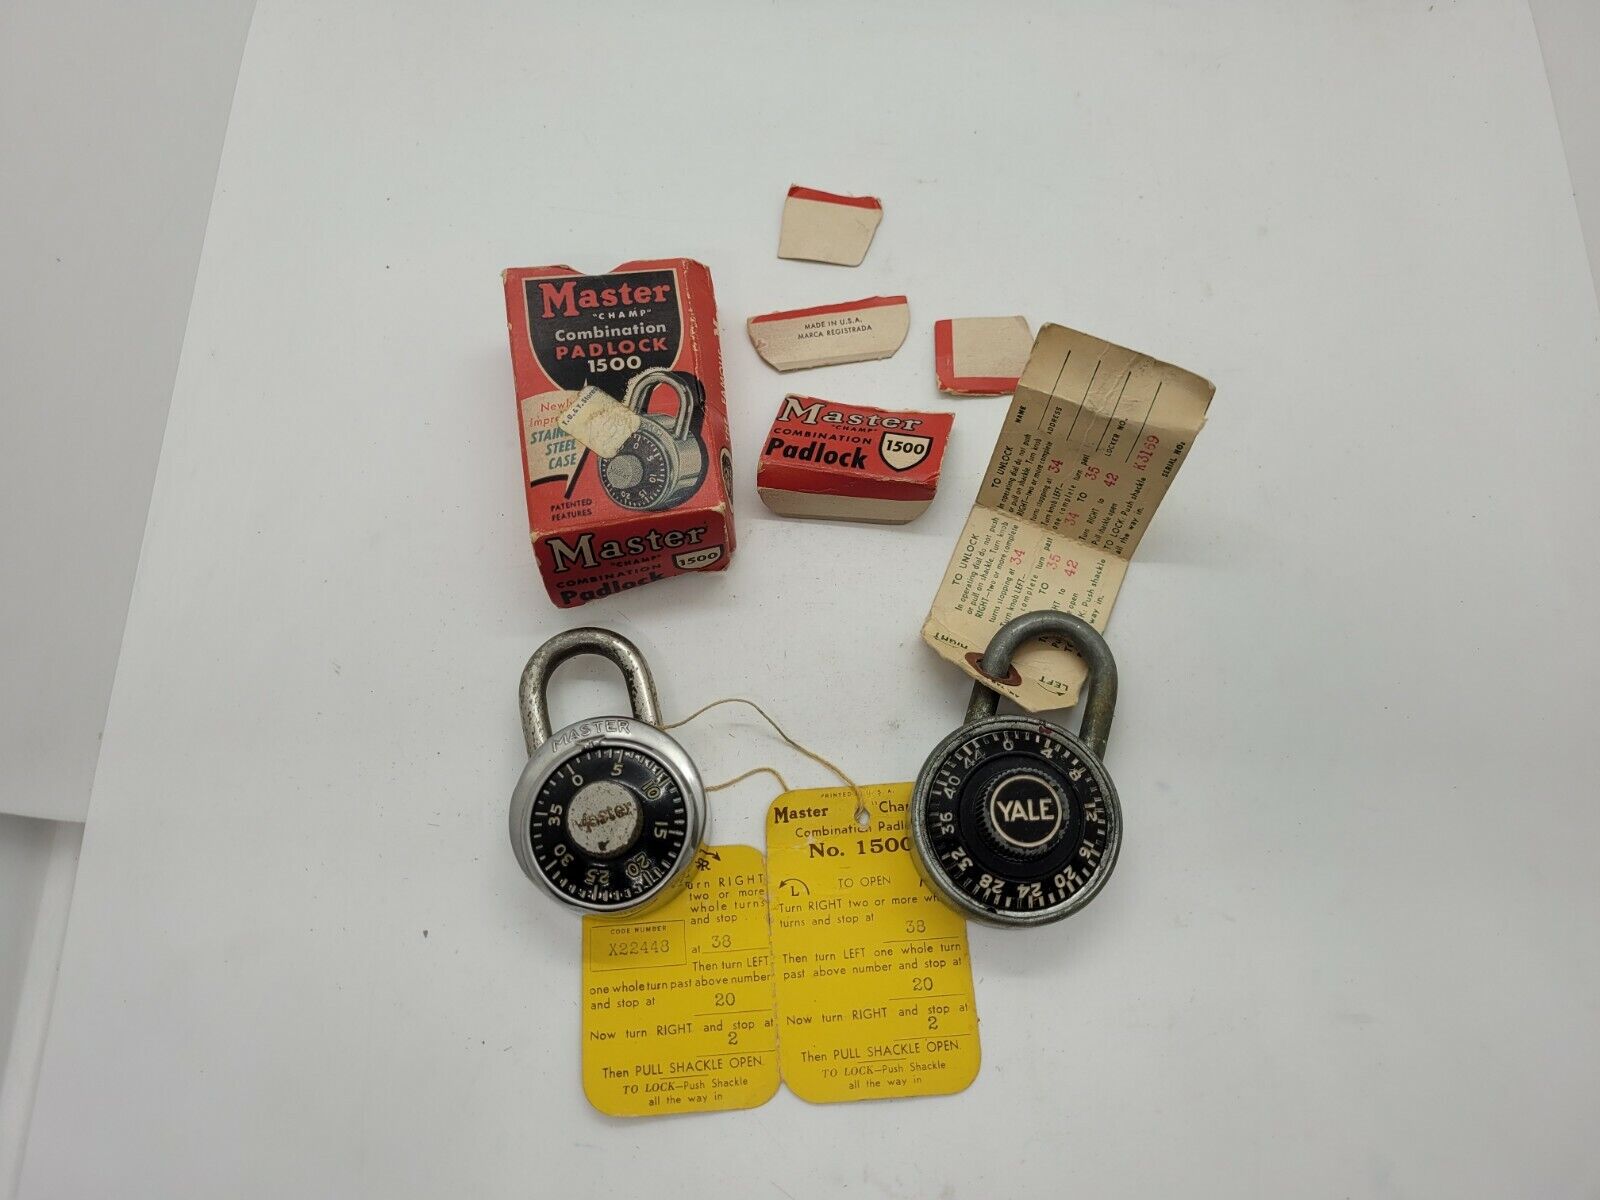 Vintage Master And Yale Combination Padlocks. Working Condition